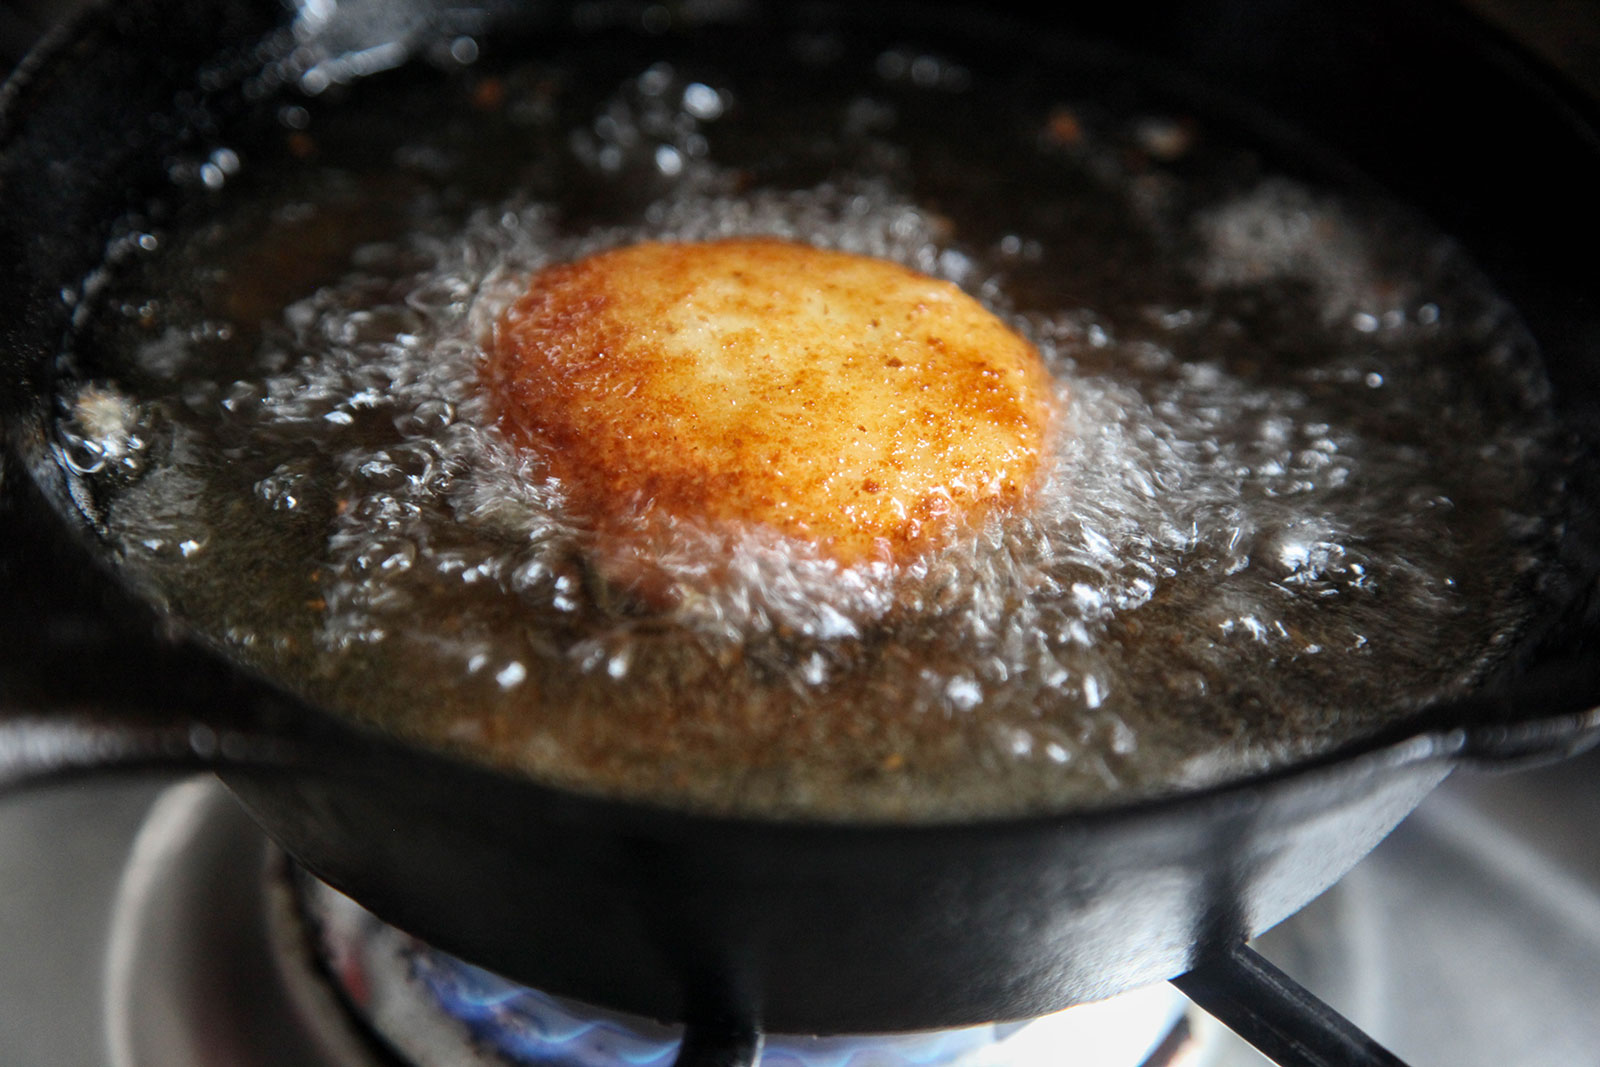 Frying croquette in oil for making Perfect Potato Croquettes (Bangladeshi Alu Chops)